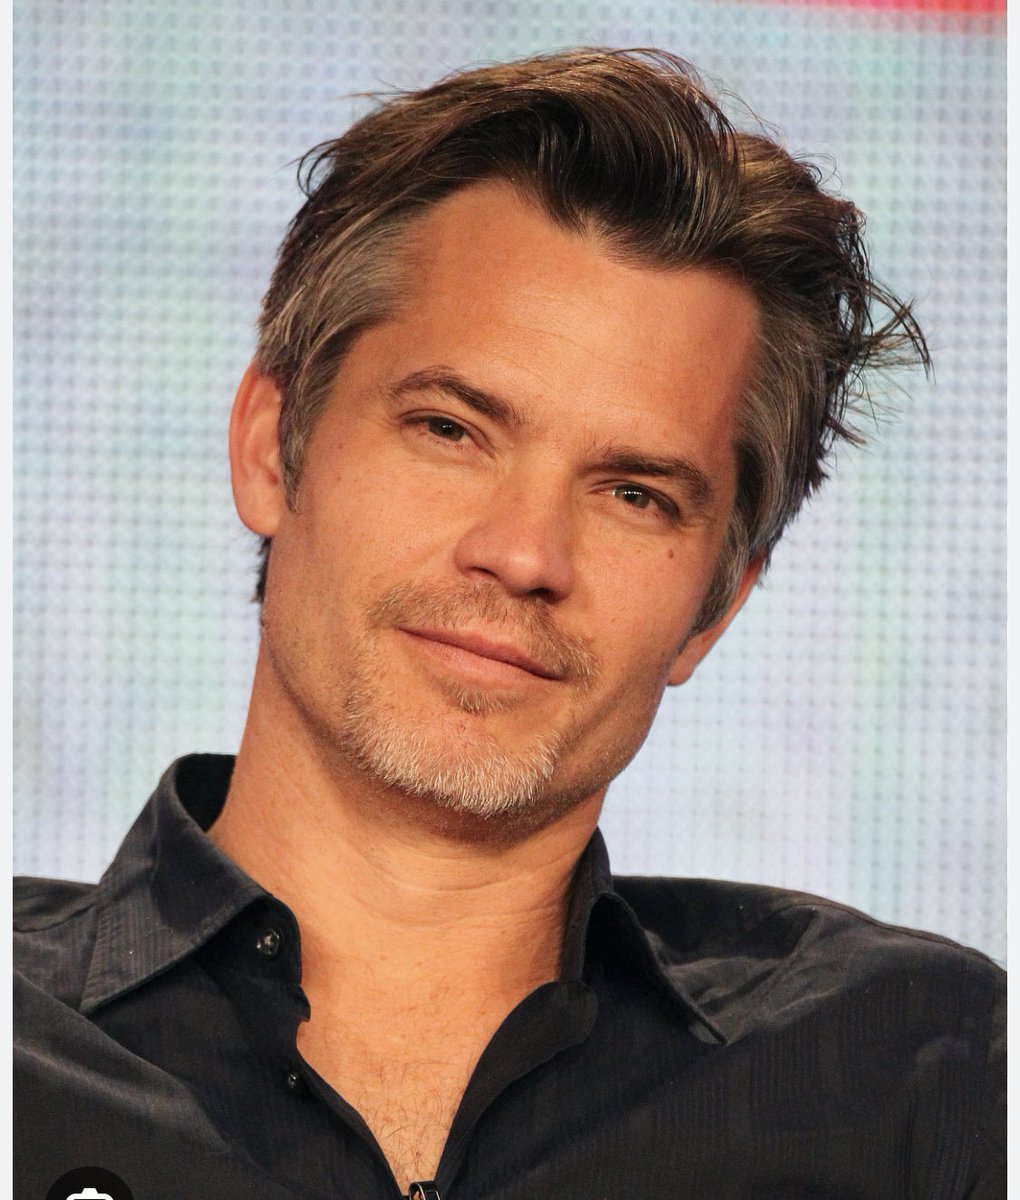 I’m just recovering from having my gall-bladder removed at Cedar Sinai hospital by watching “Justified.” What a great series and loving the relationship between Timothy Olyphant and Walton Goggins